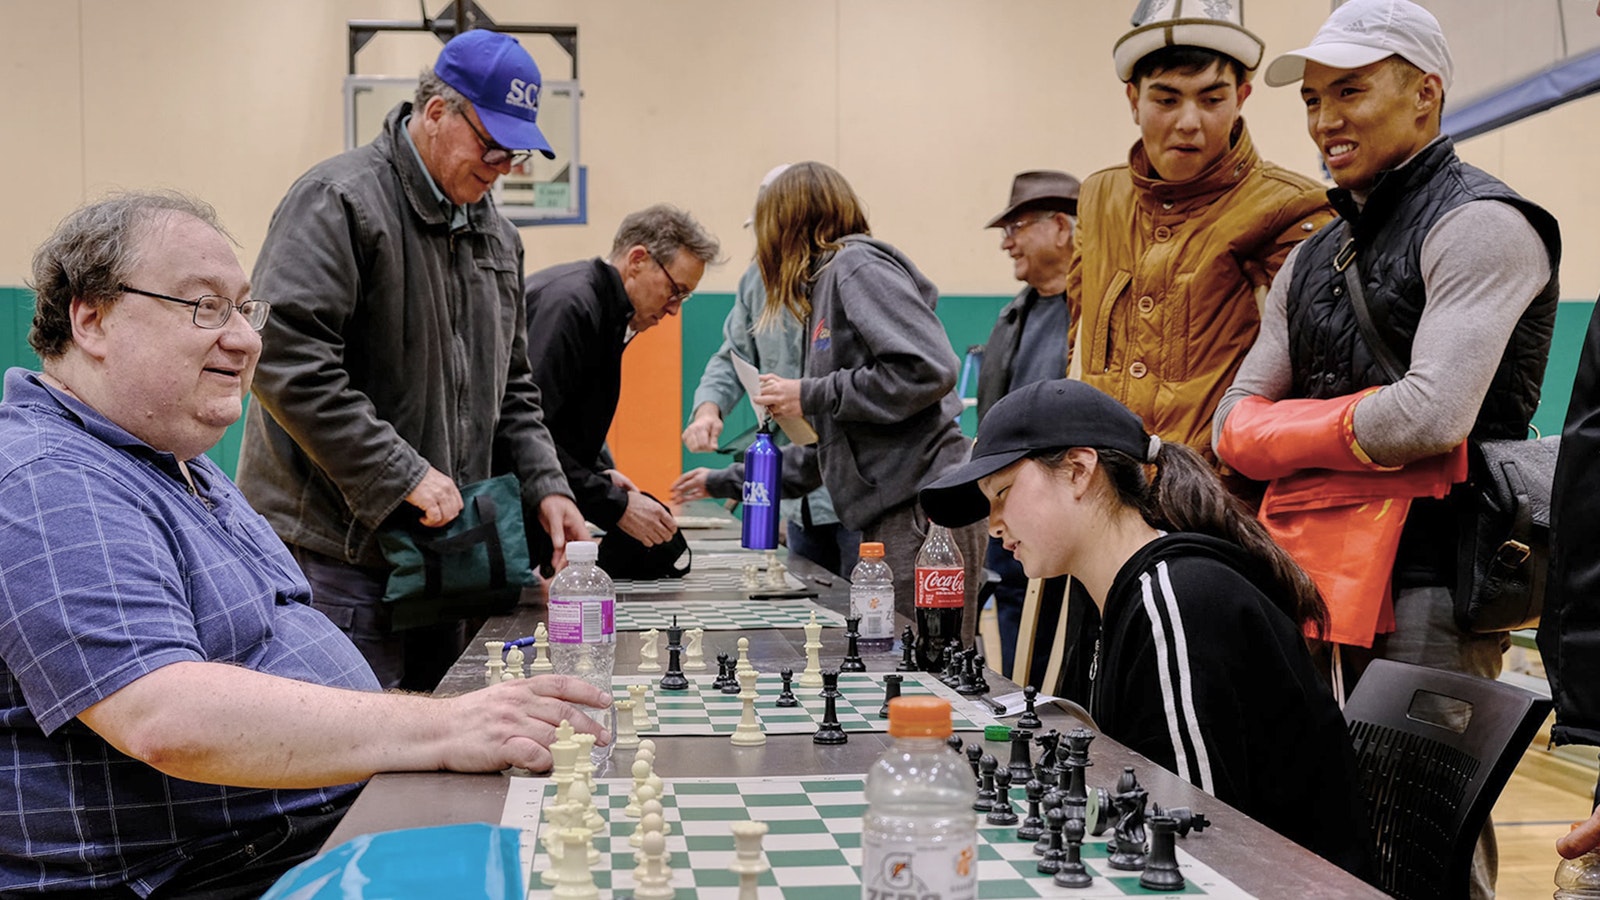 Chess players square off during the first Sheridan Chess Association Tournament last year.